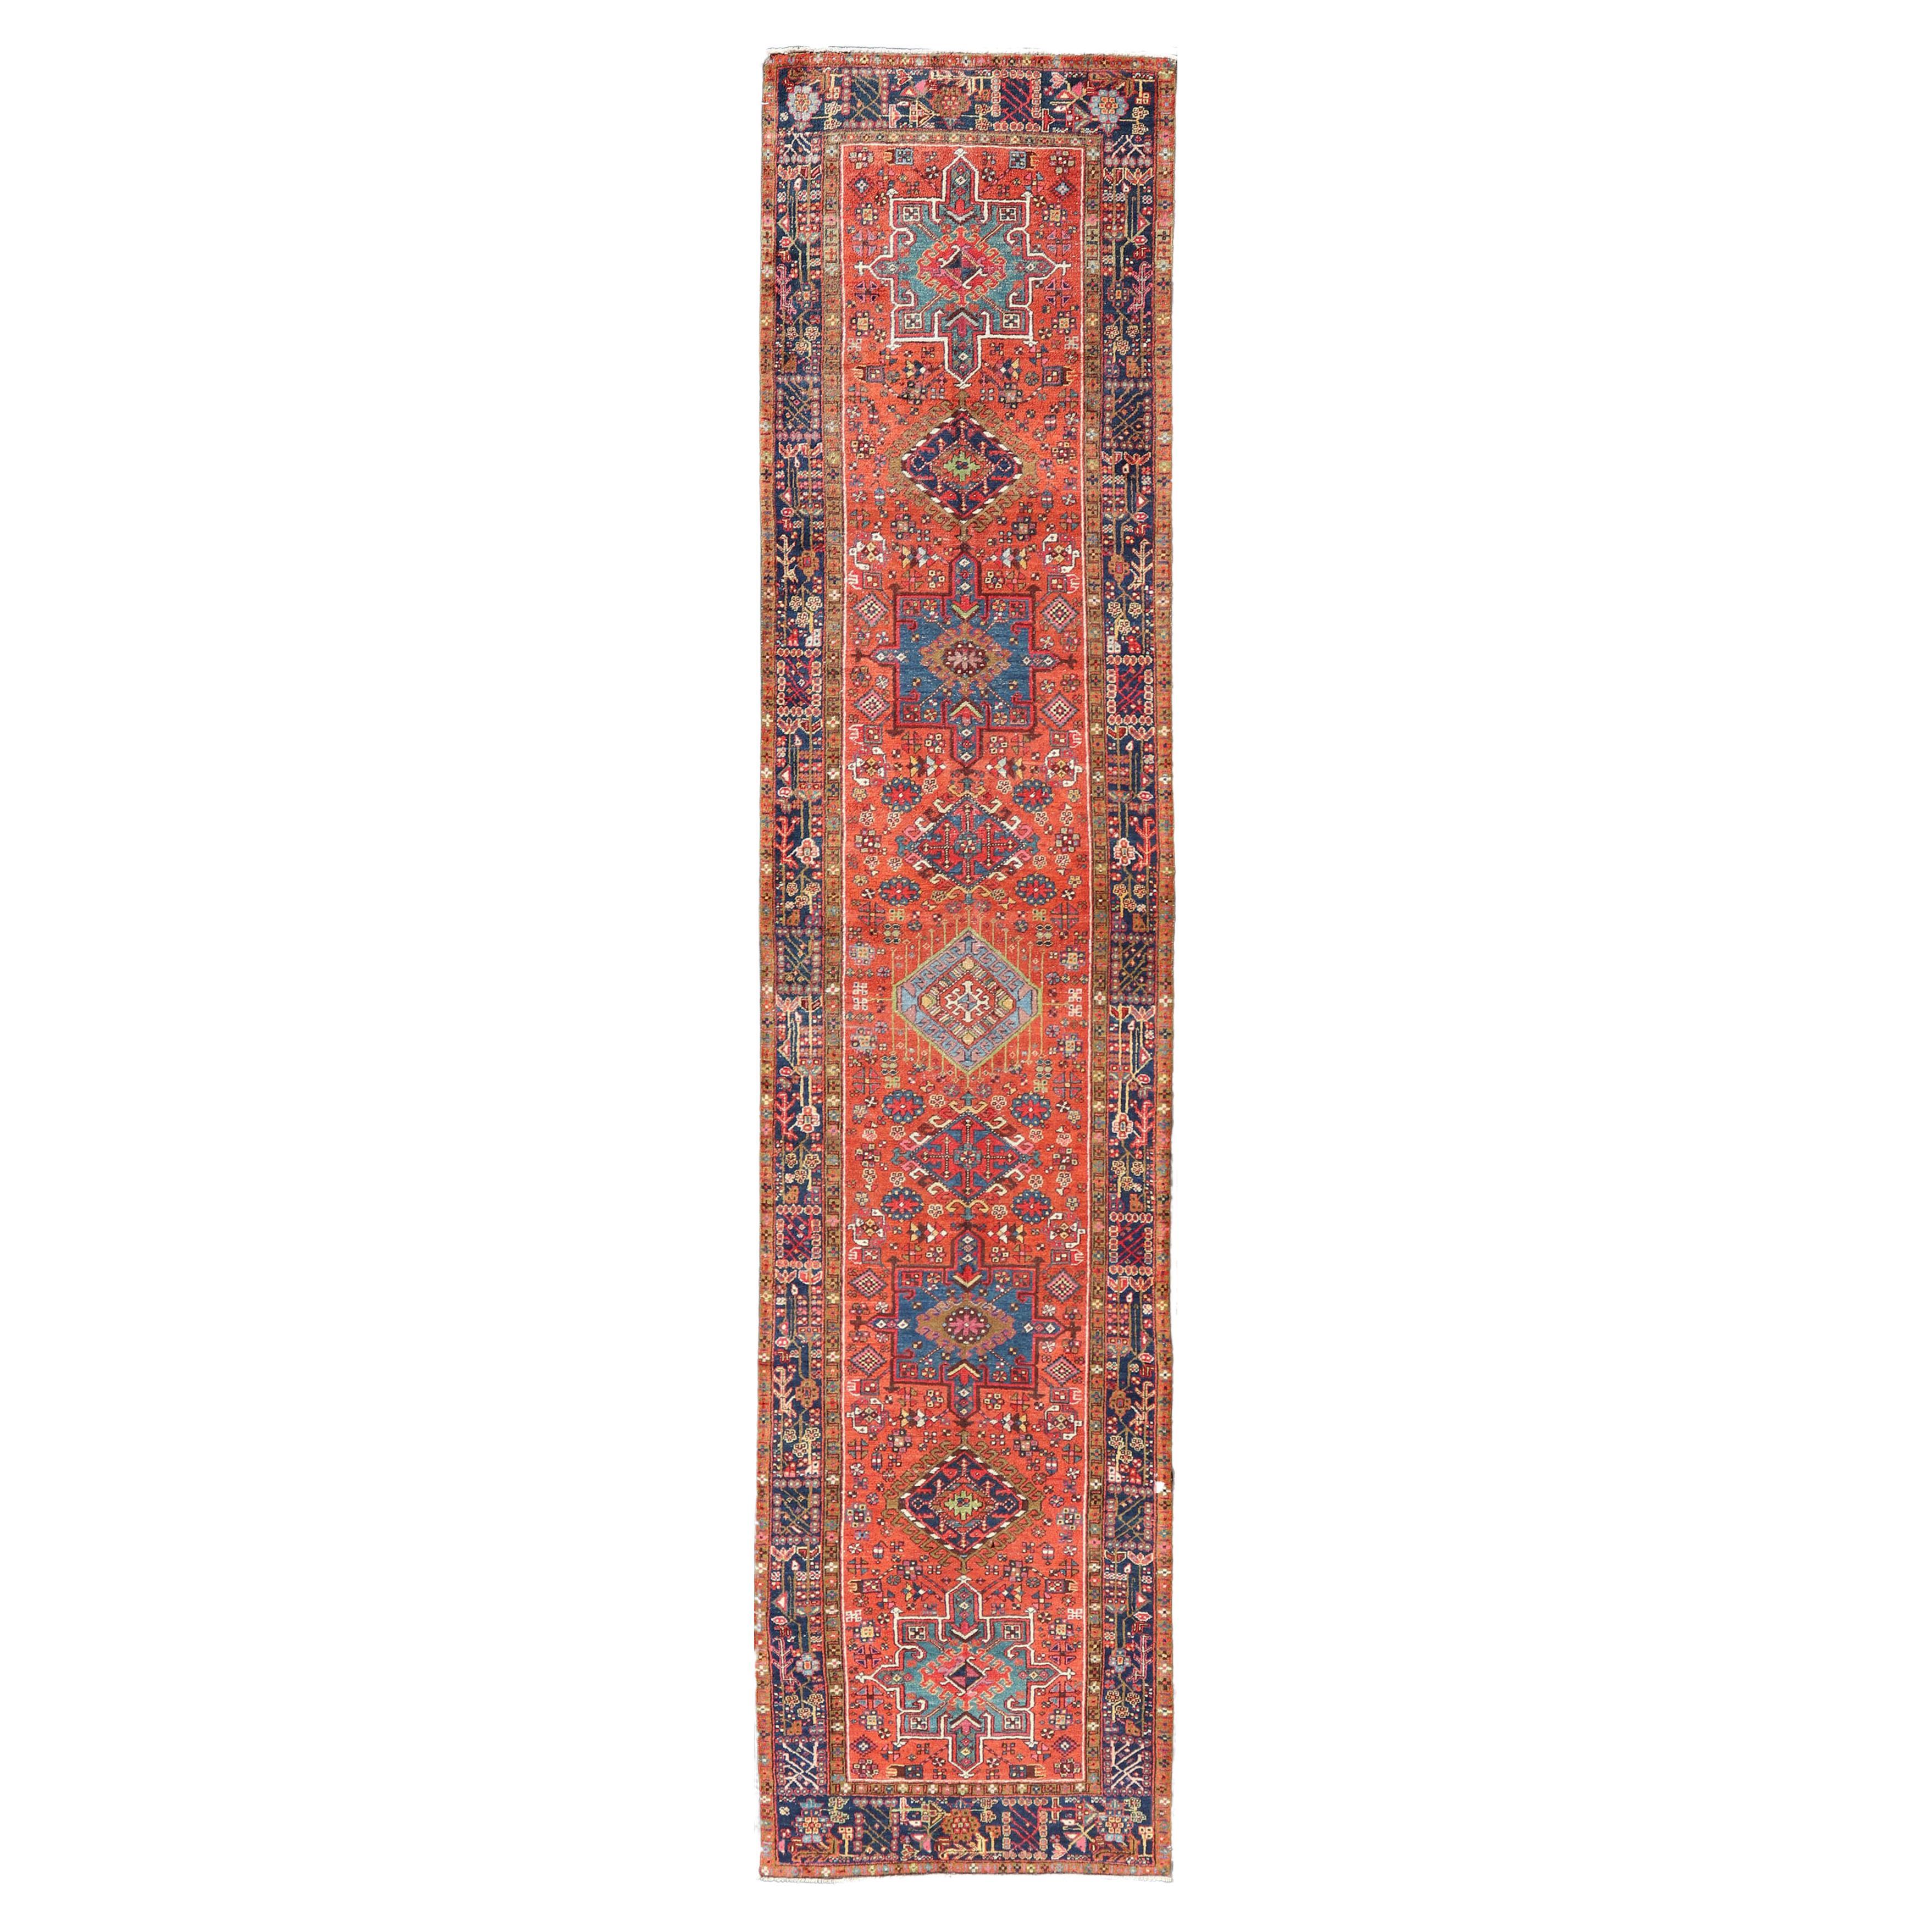 Antique Hand Knotted Geometric Persian Long Heriz Runner in Red, Blue and Teal